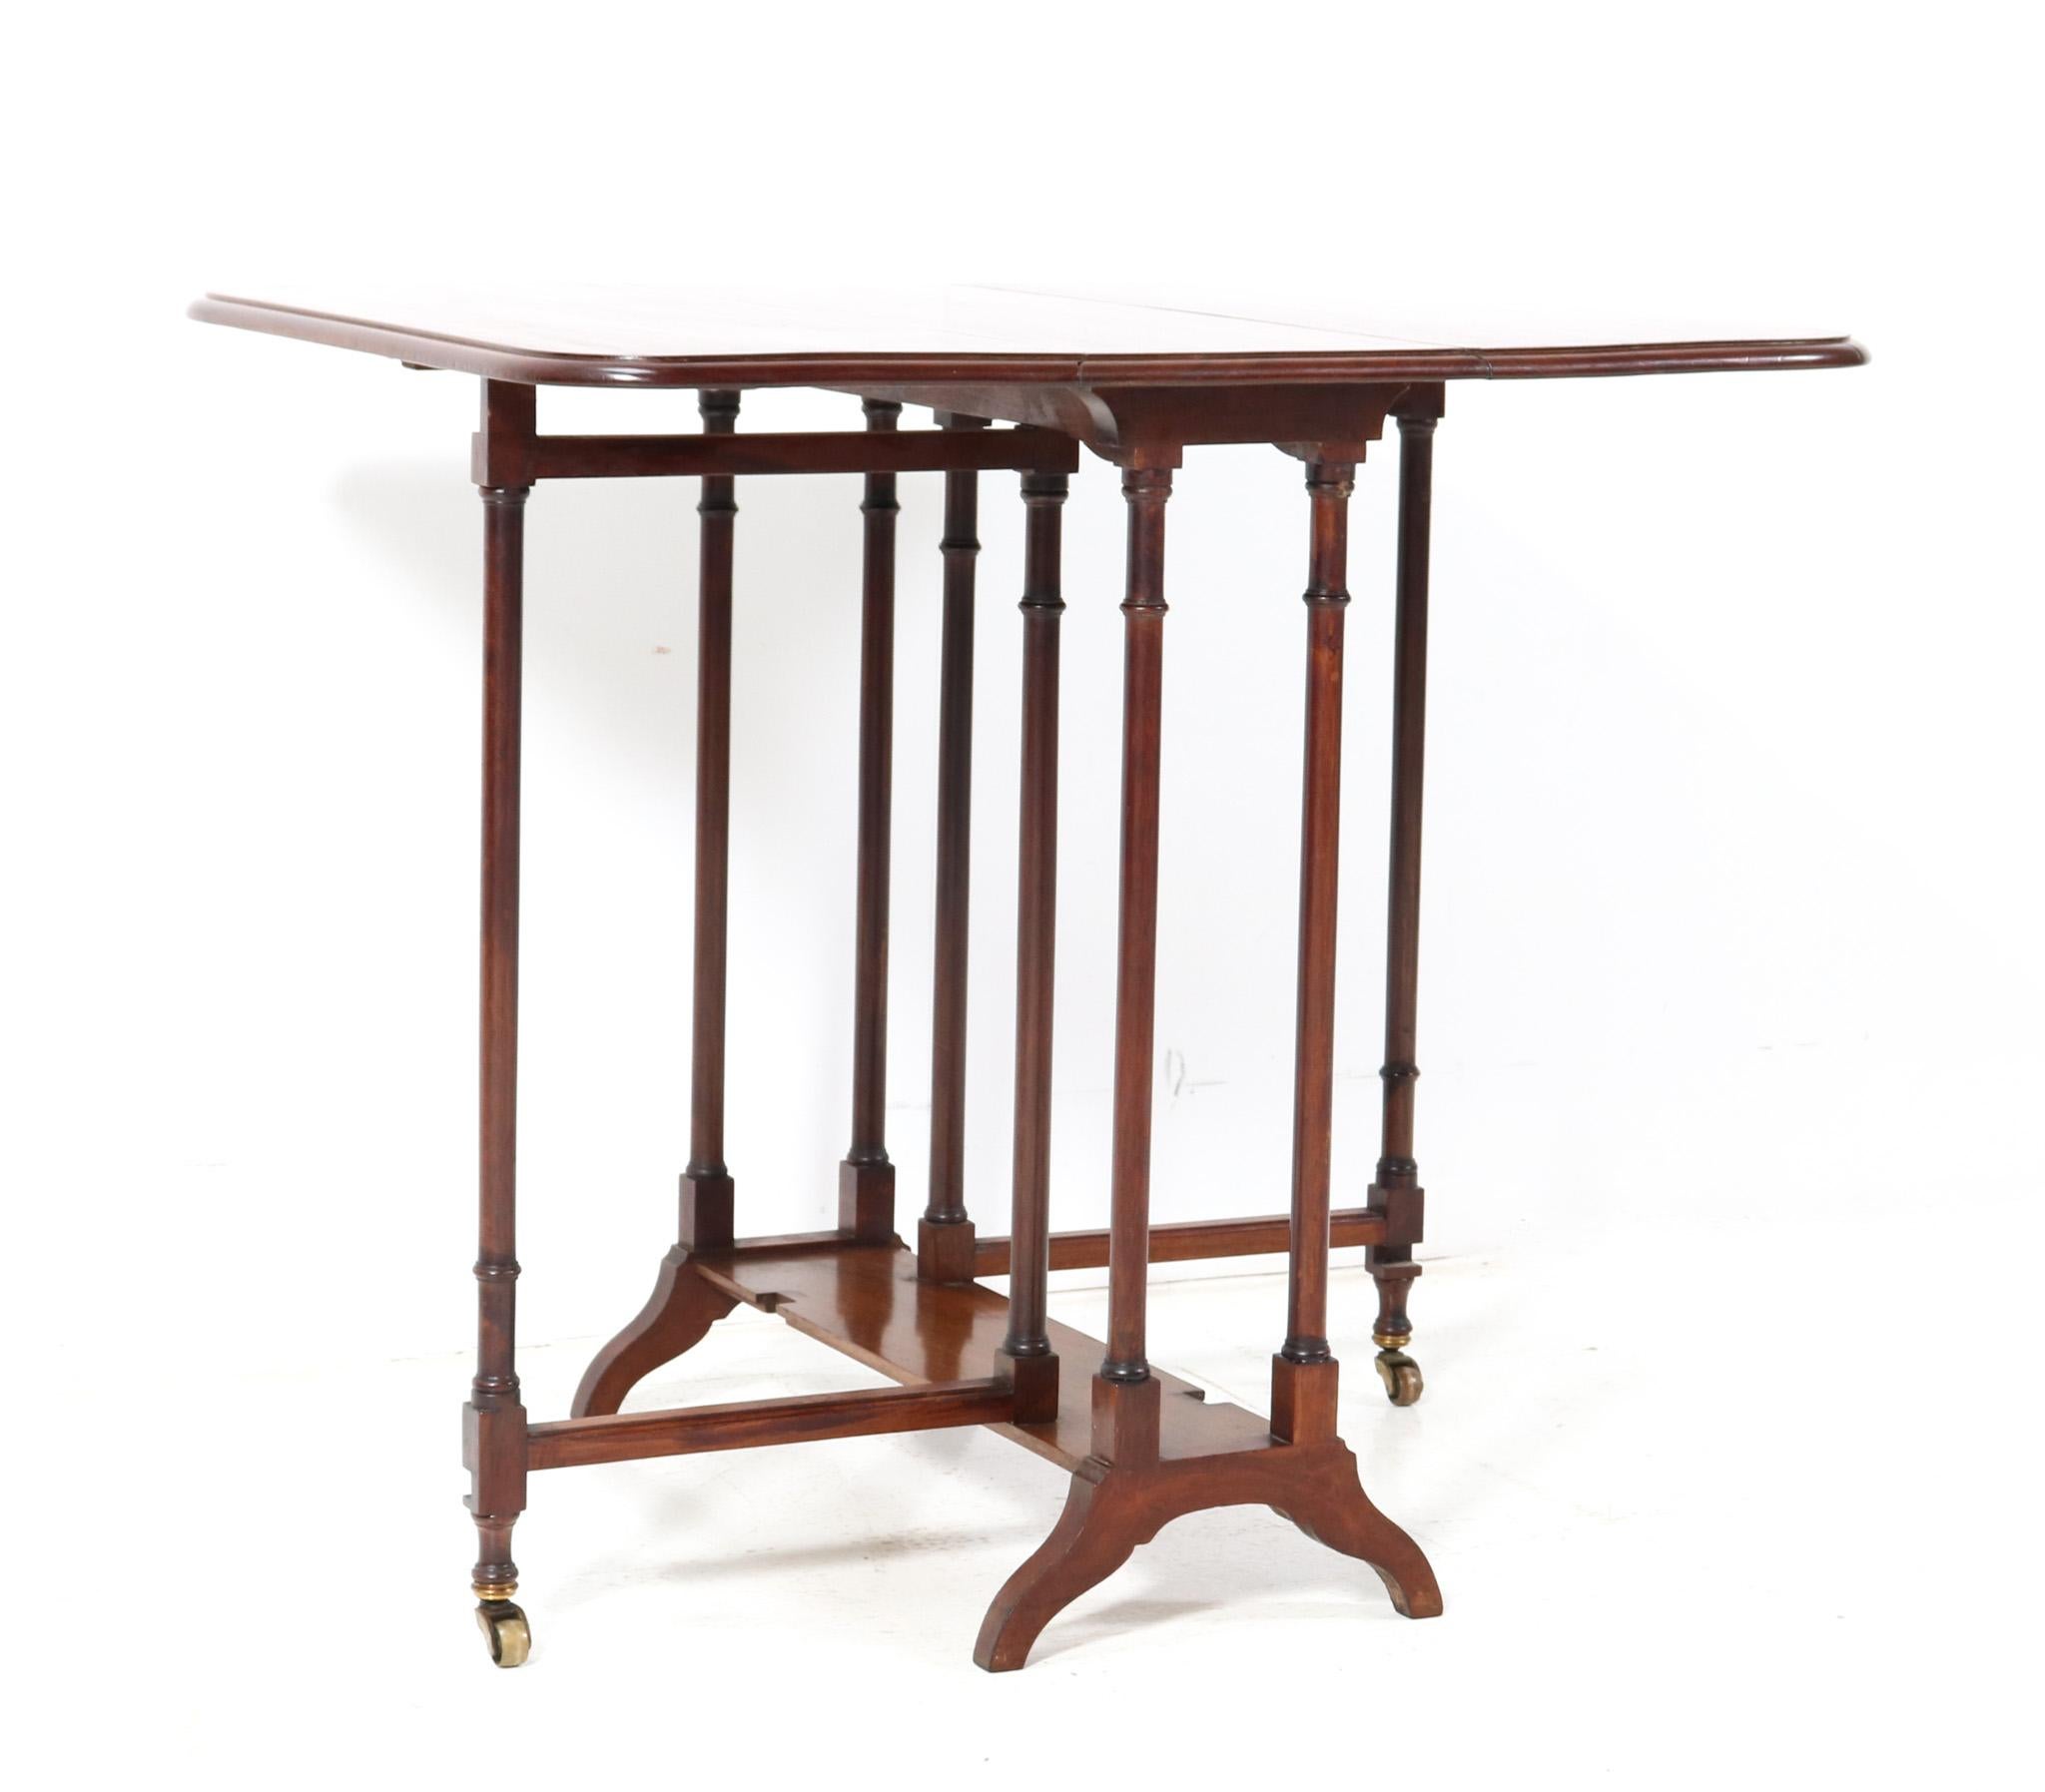 Georgian Walnut English 19th Century Spider Leg Table with Drop Leaves For Sale